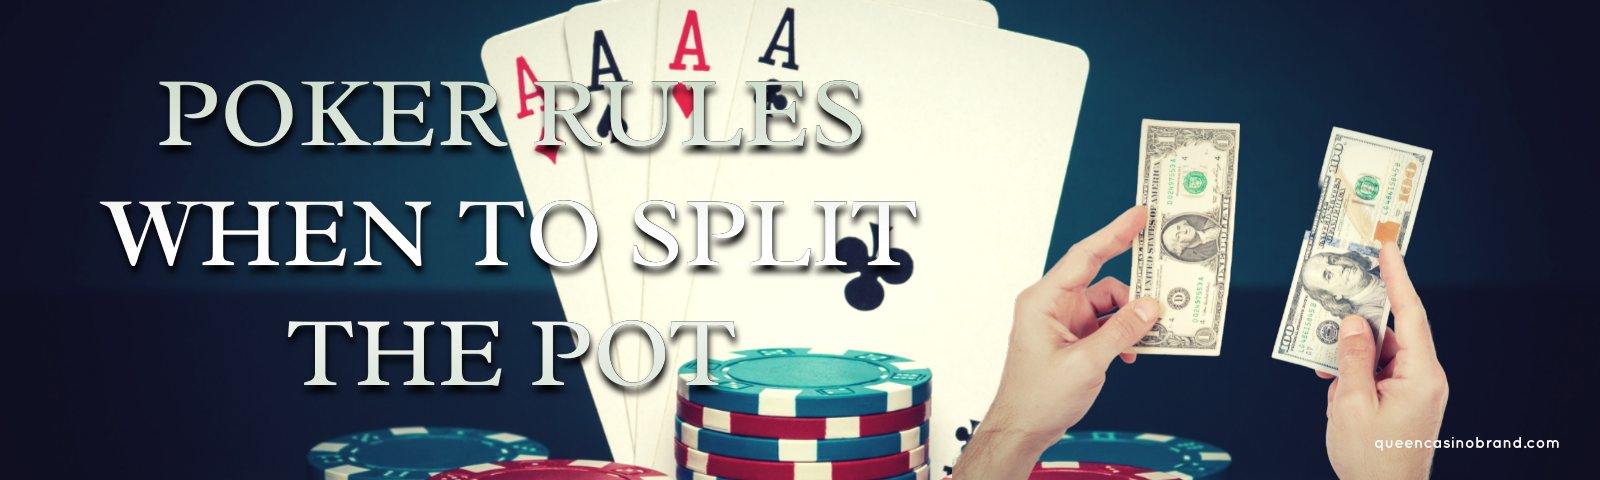 Poker Rules When to Split the Pot | Queen Casino Brand